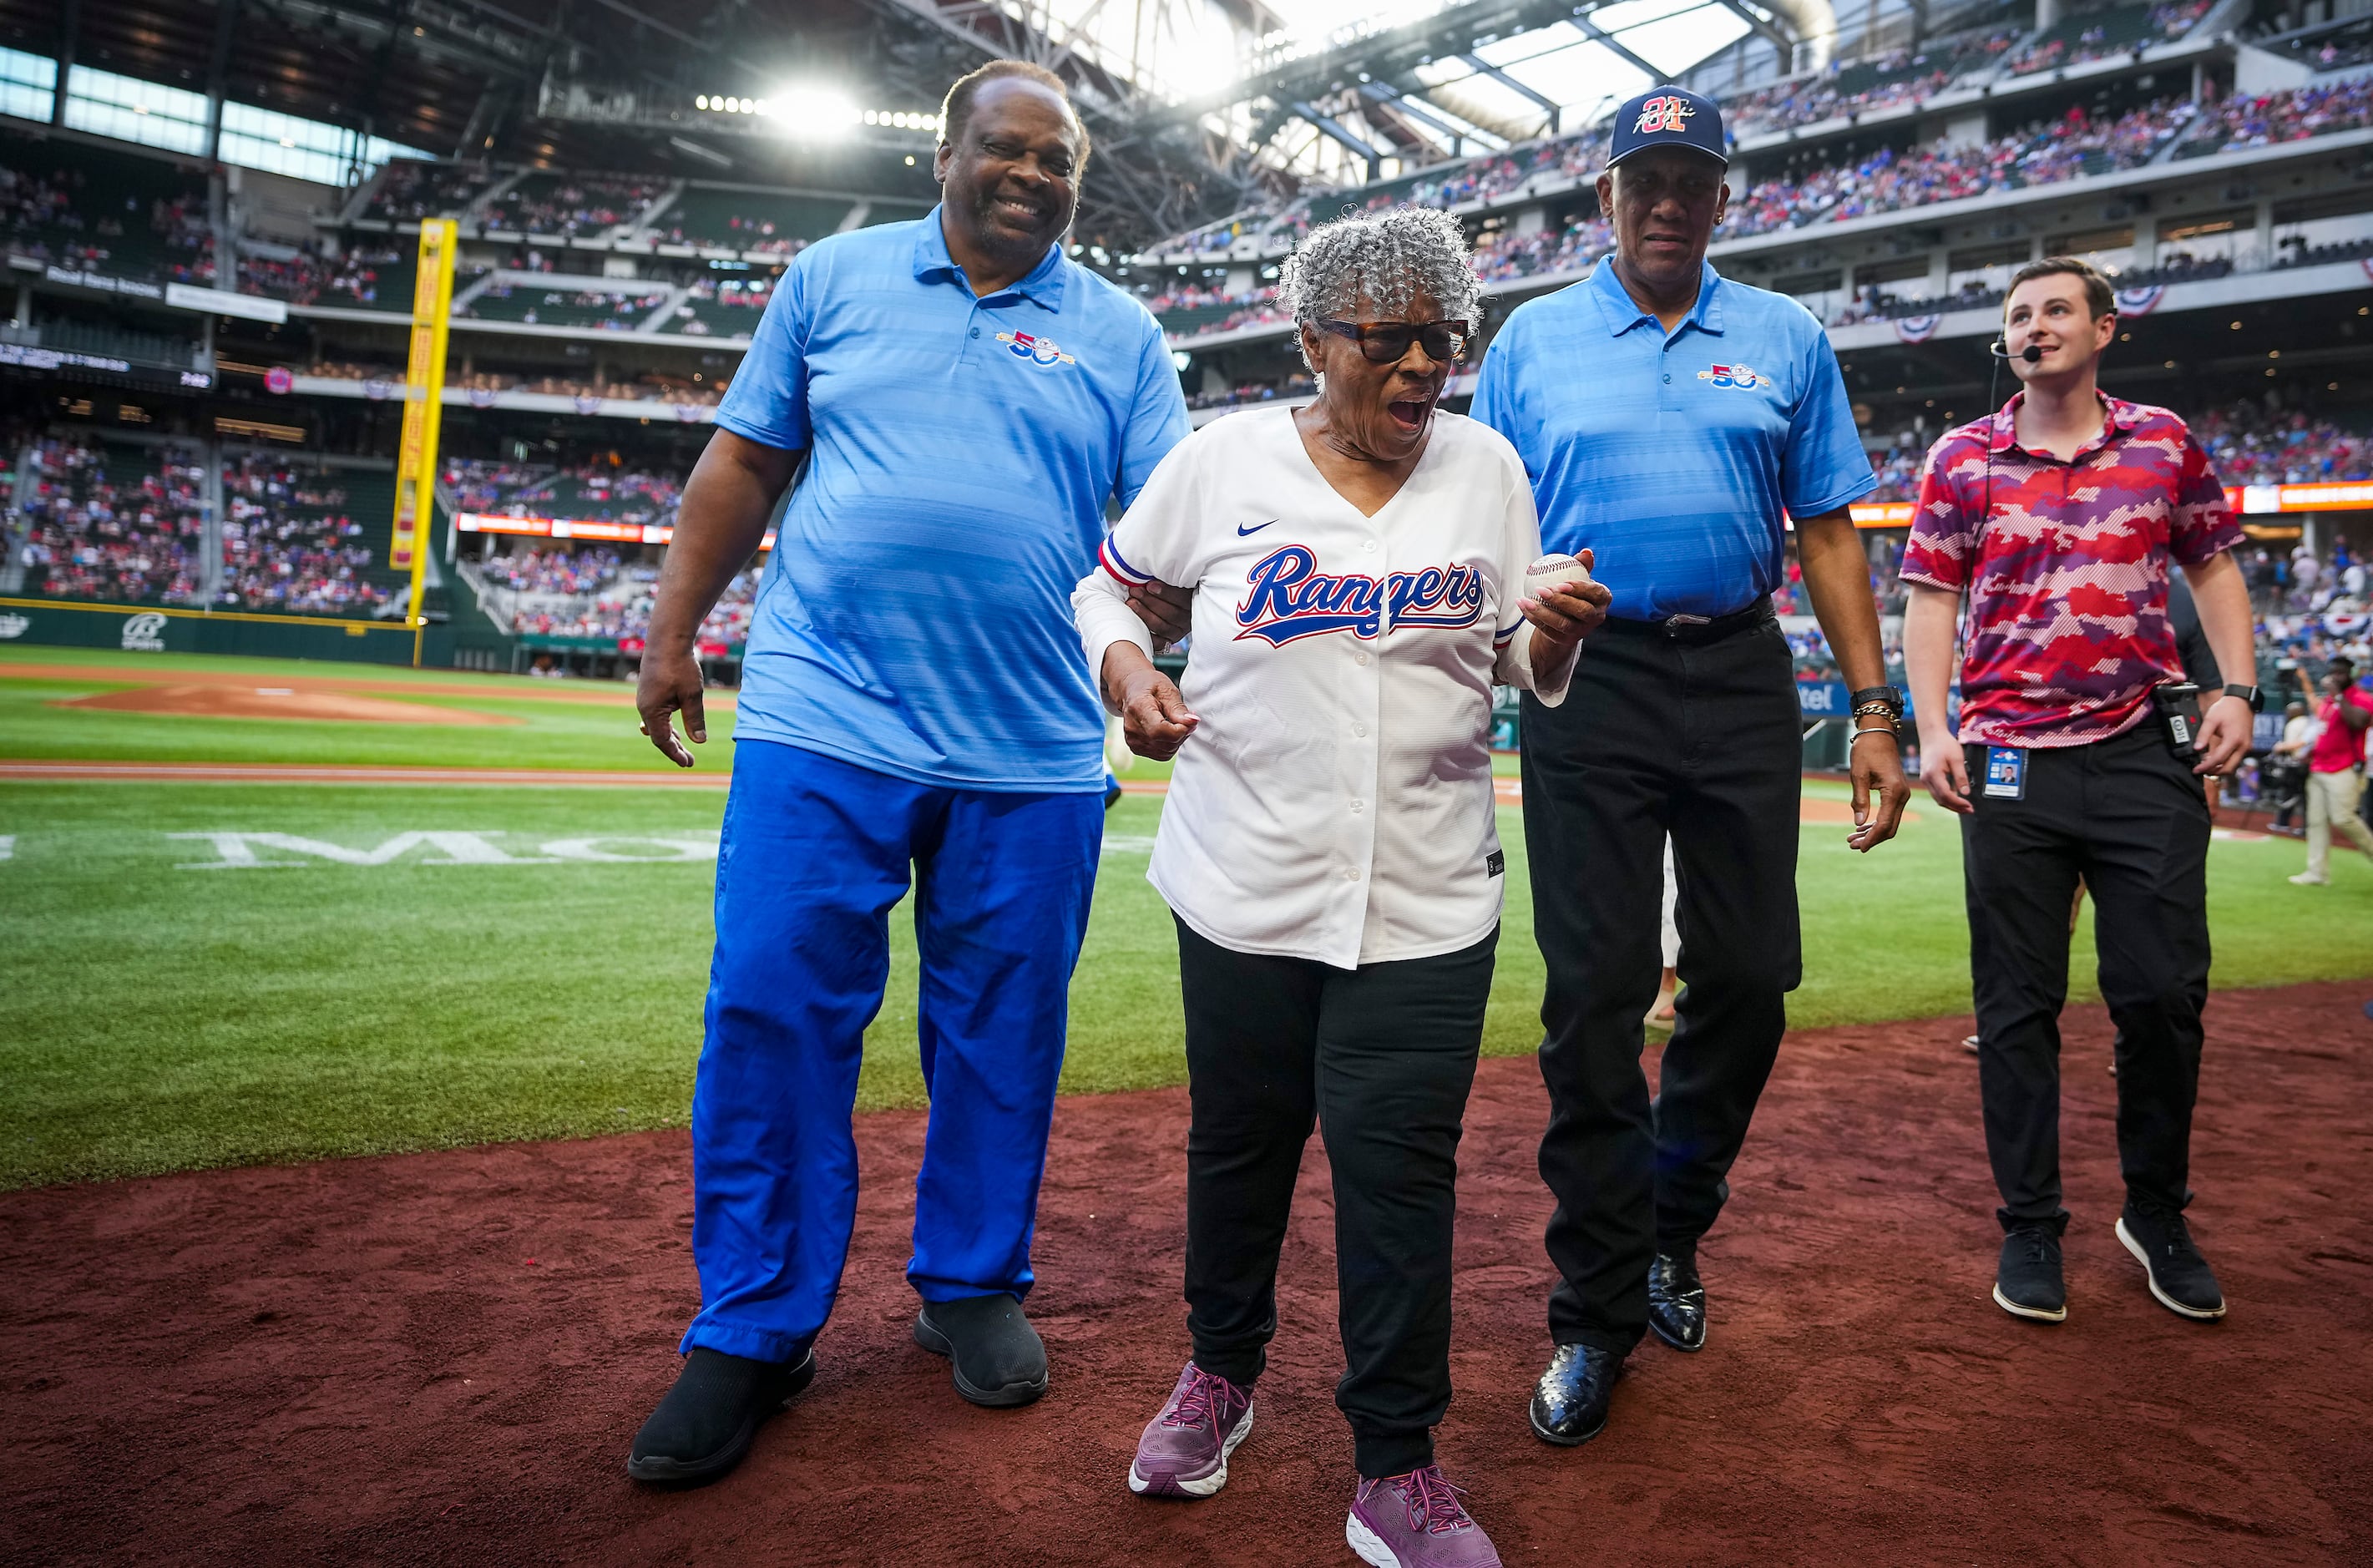 Opal Lee throws first pitch at Texas Rangers game